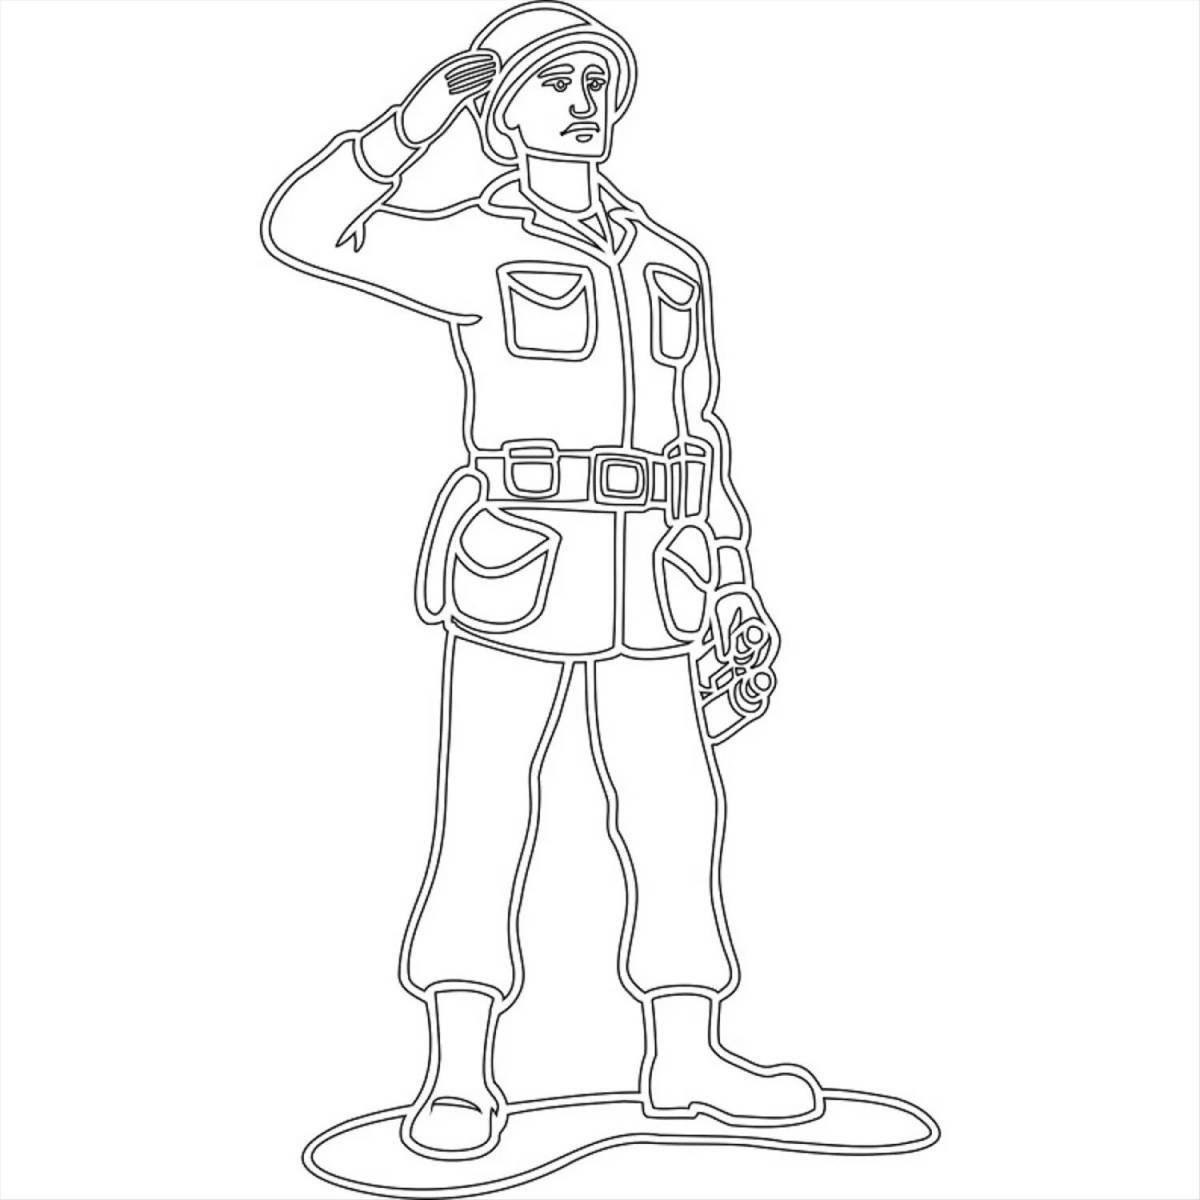 Exquisite soldier coloring pages for kids